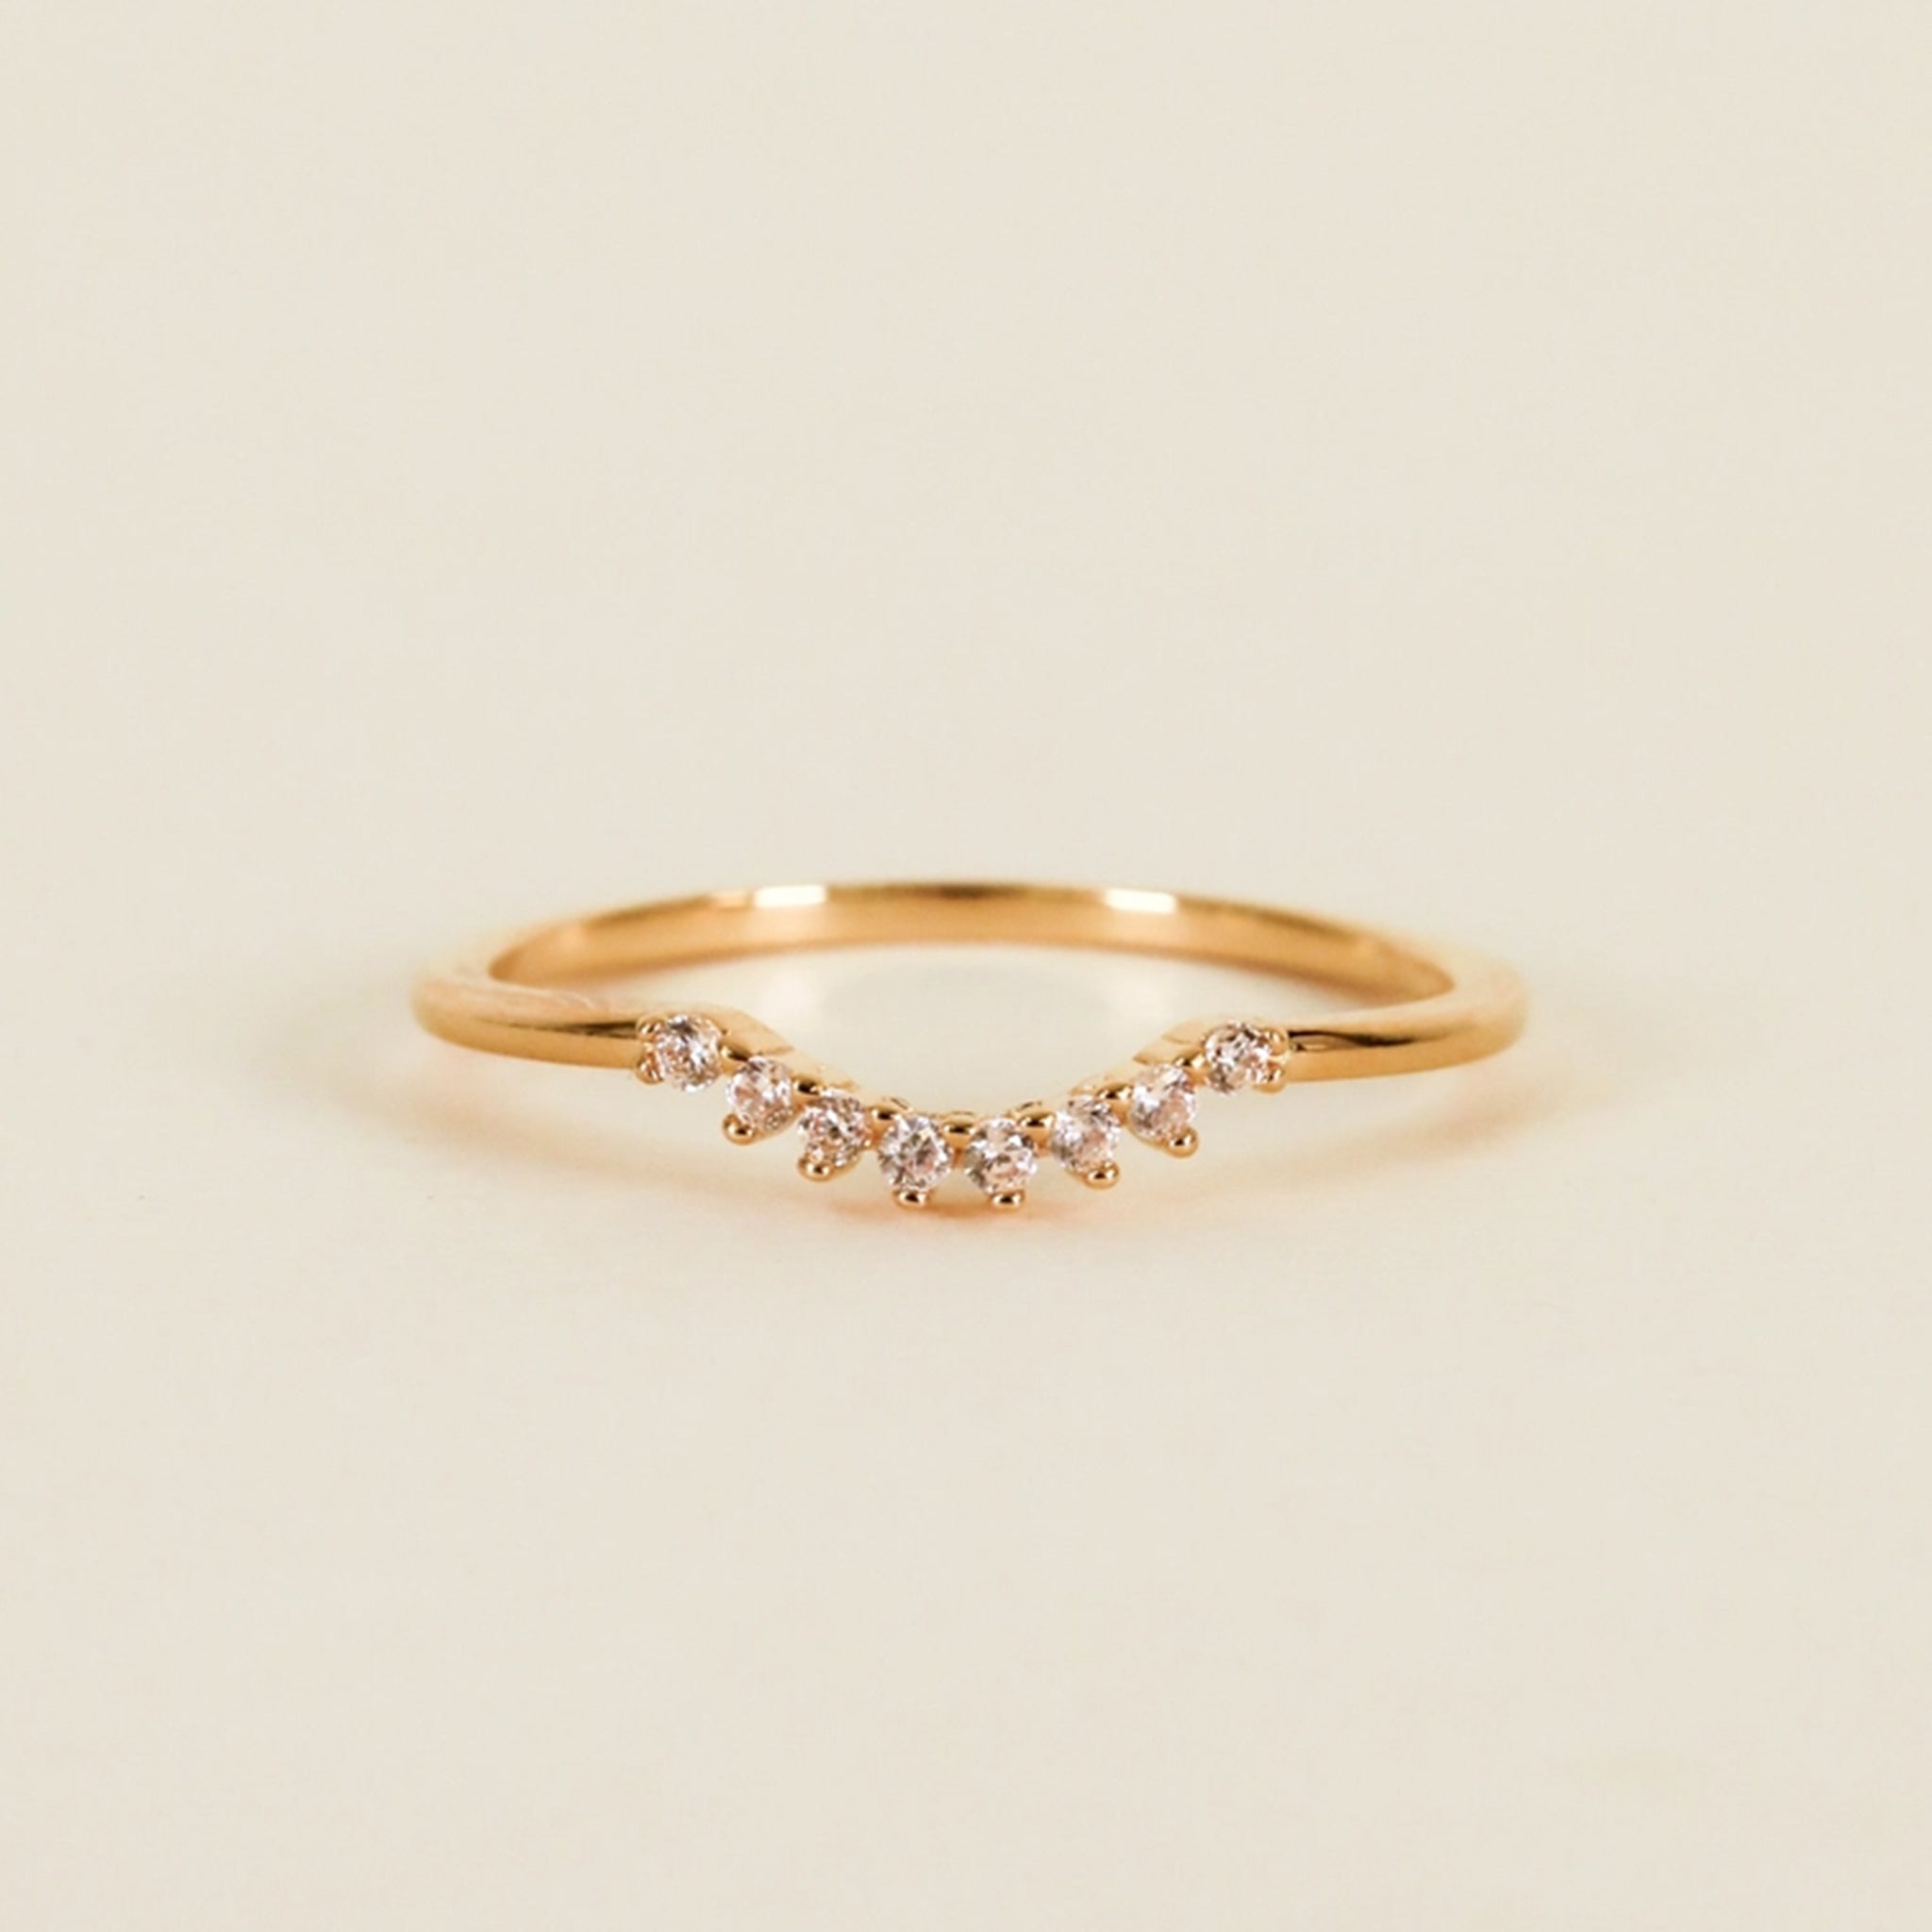 On a tan background is a gold ring with small cubic zirconias along the small dip. 